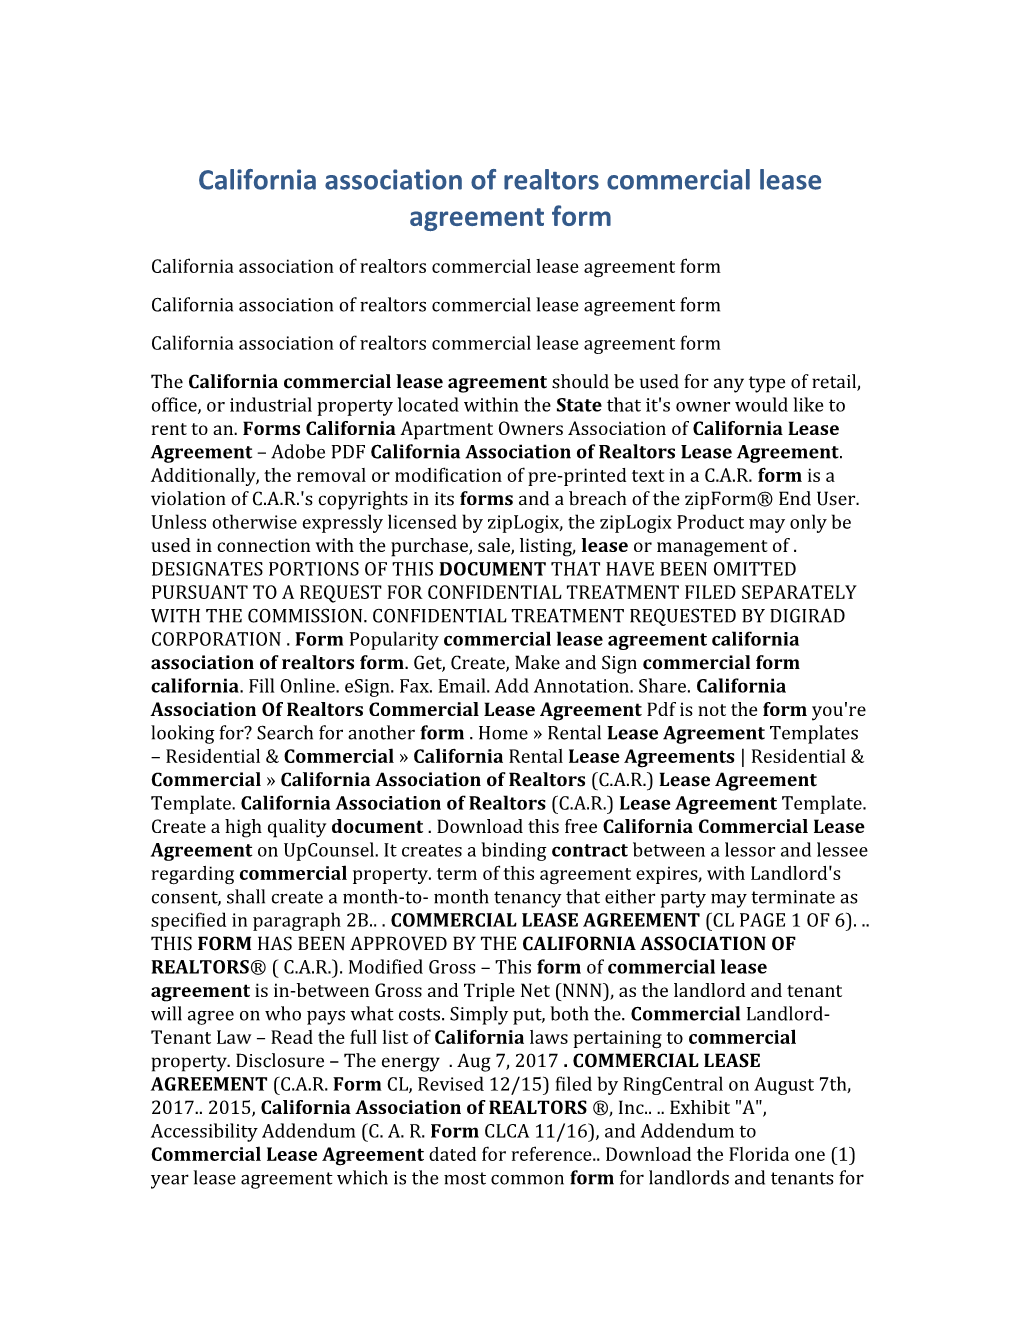 California Association of Realtors Commercial Lease Agreement Form